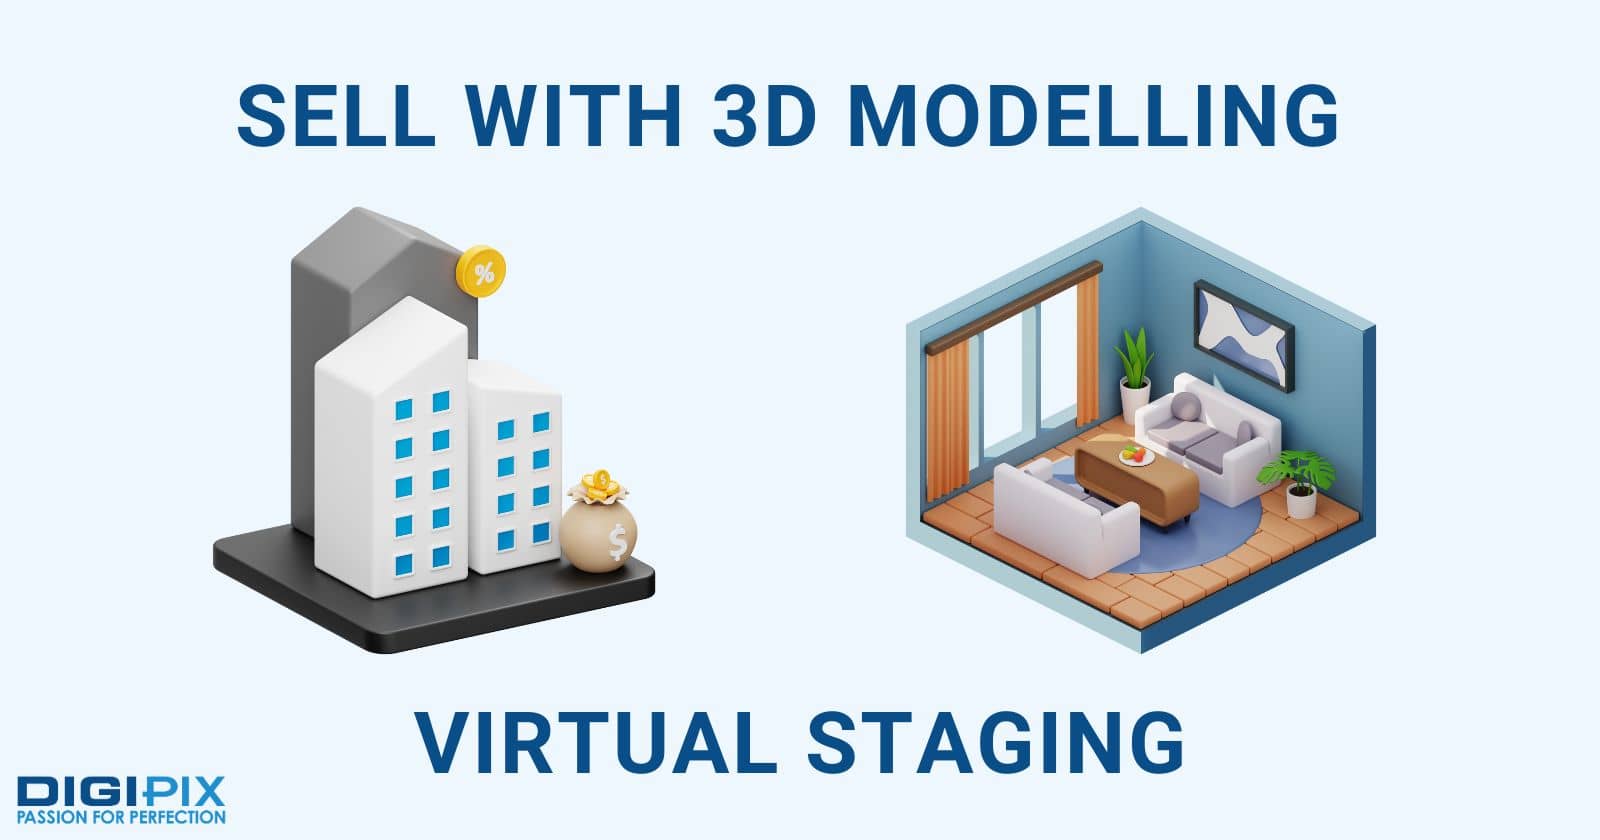 Sell With 3D Modelling Virtual Staging digipix digipixinc.com